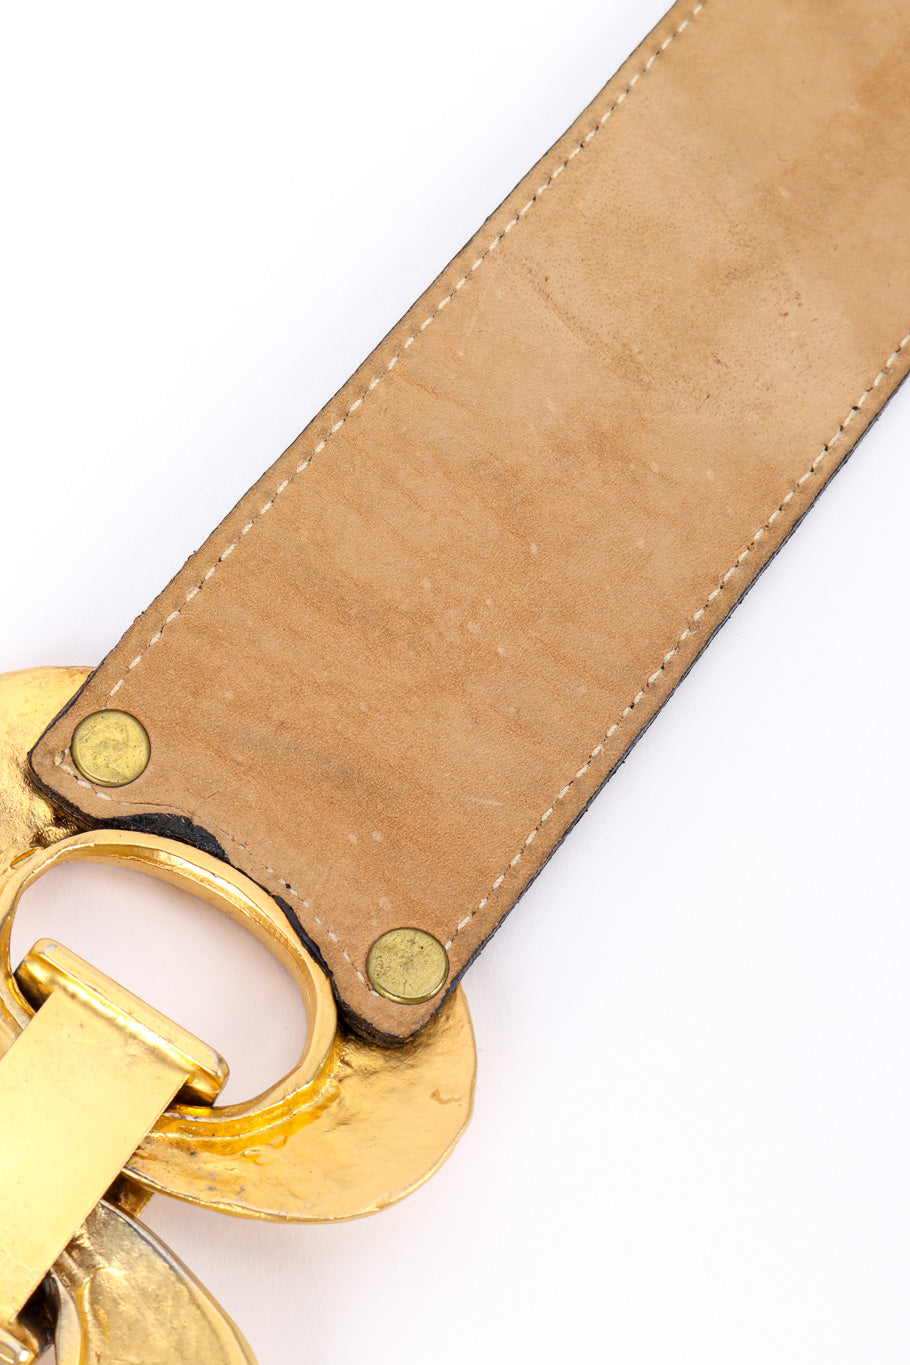 Hammered Ring Link Belt by Streets Ahead rings grommets @recessla